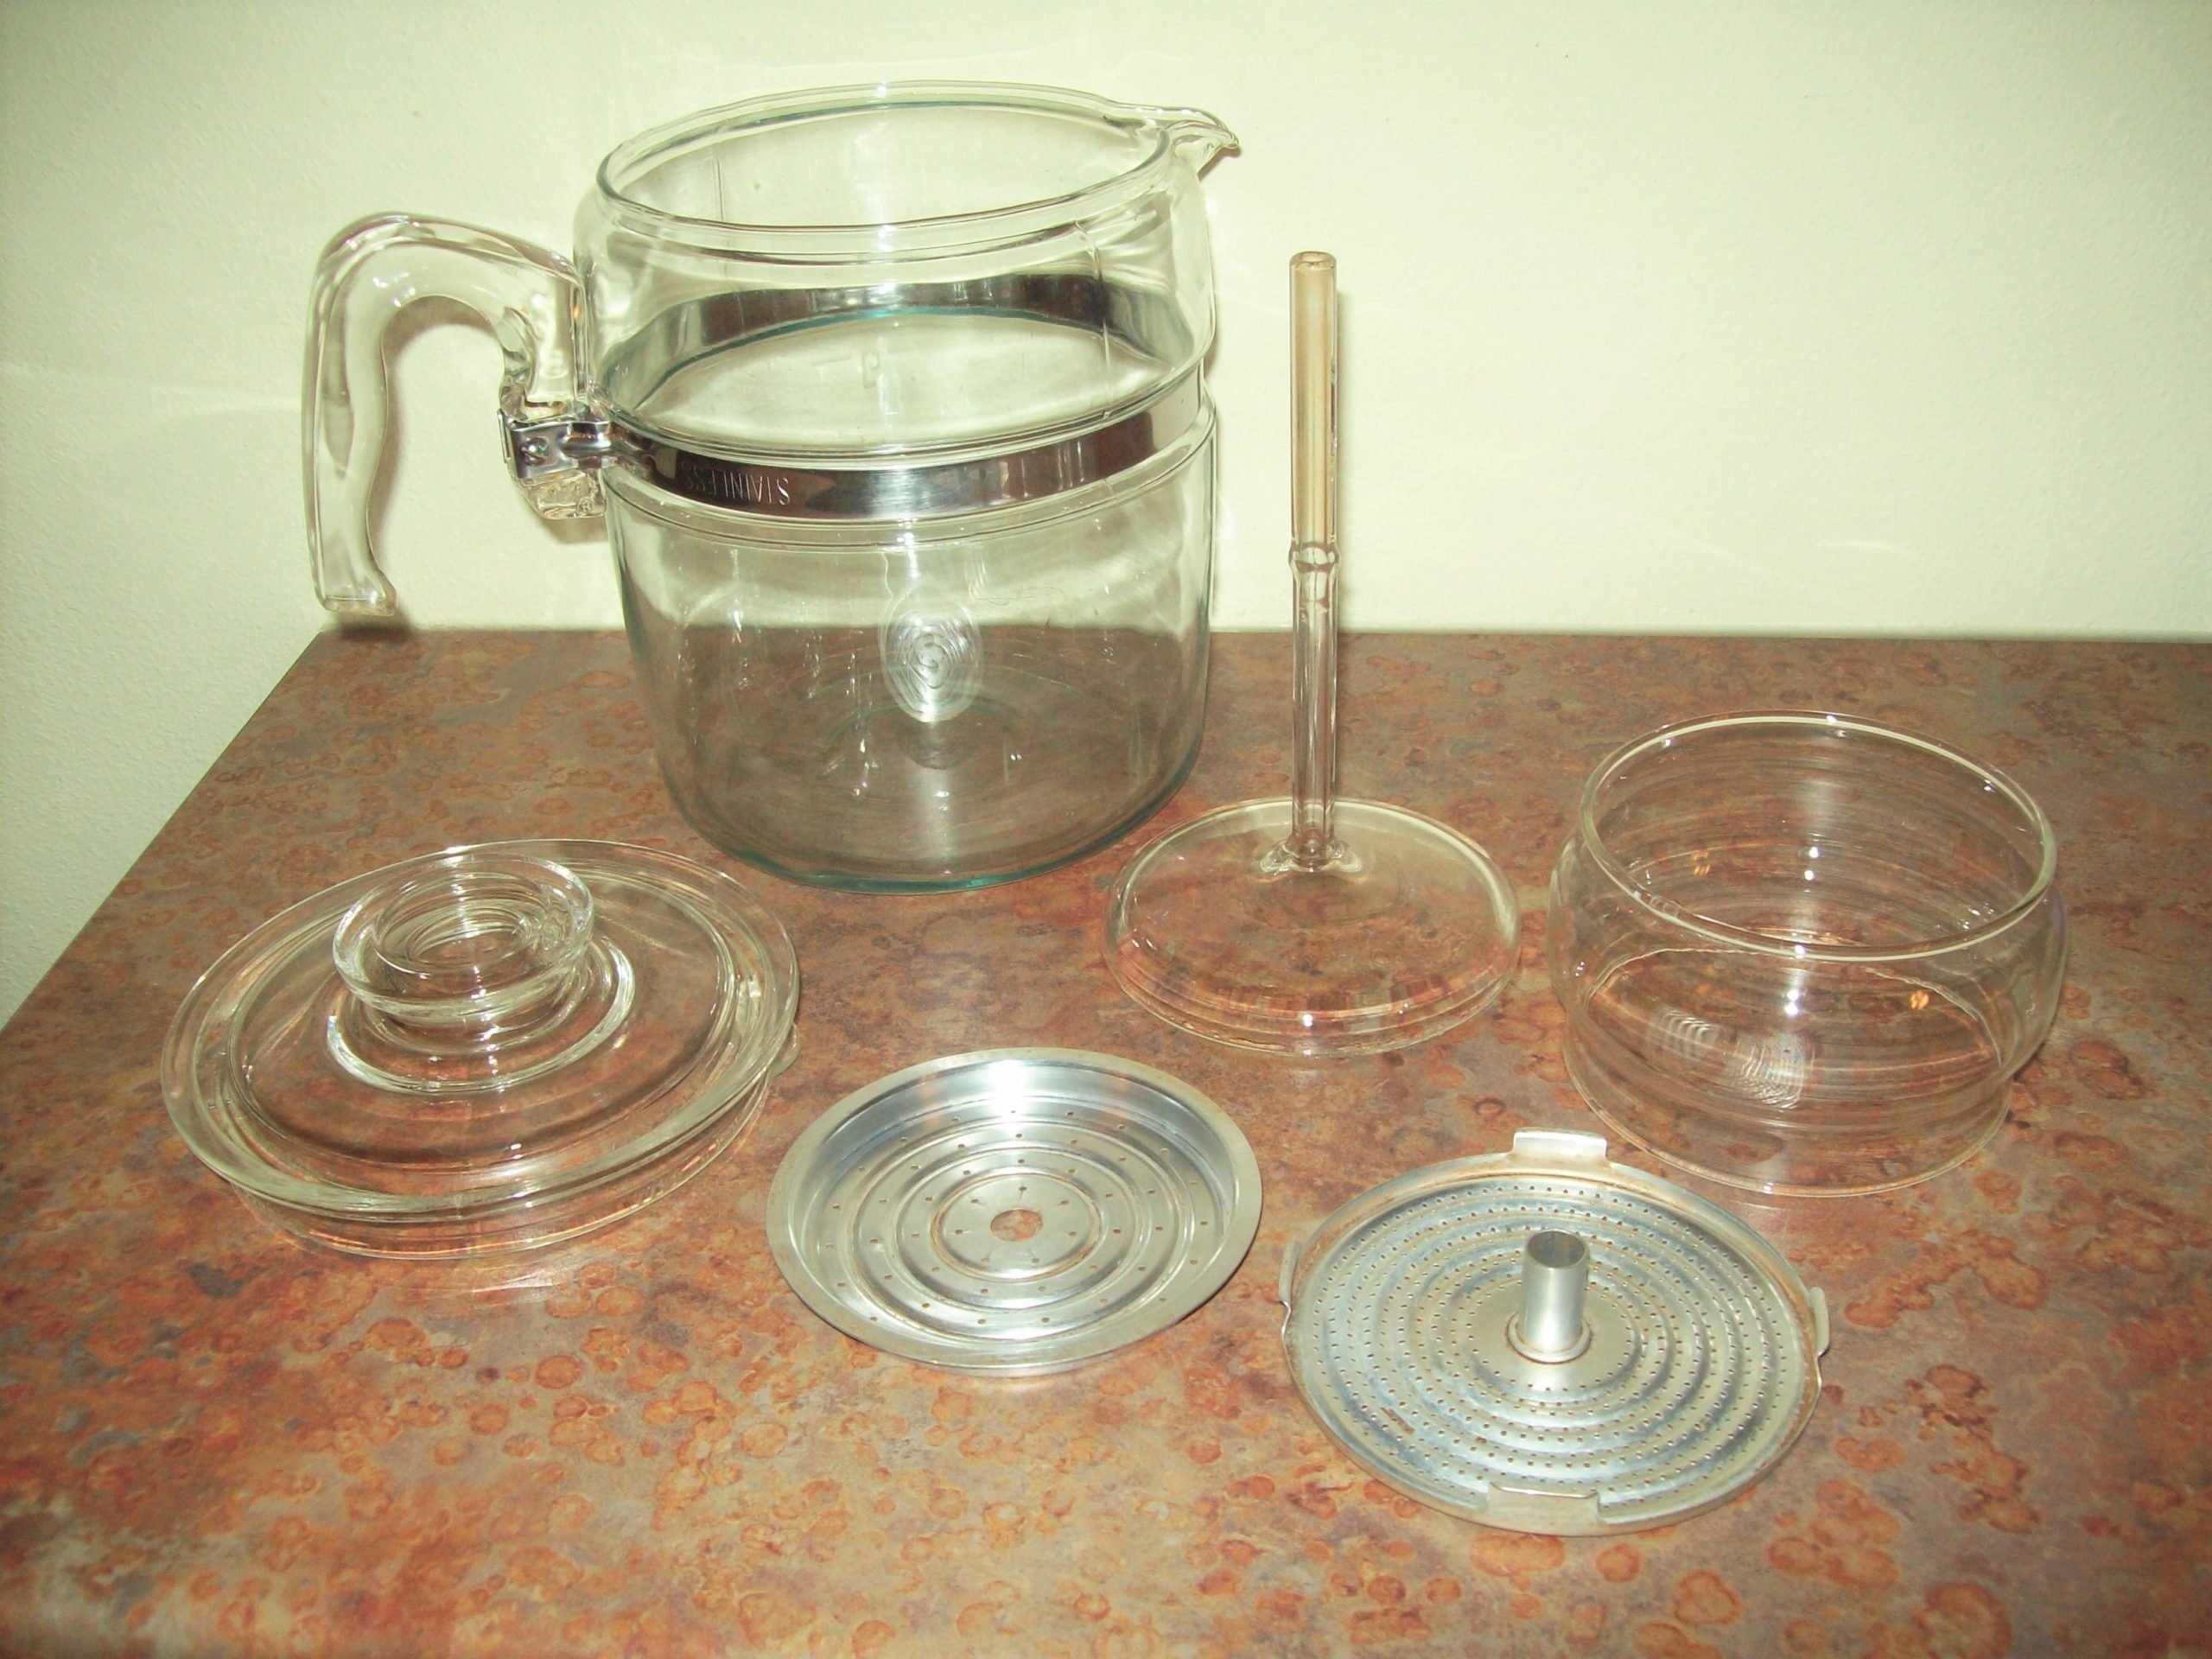 Pyrex 6 Cup Glass Percolator Carafe and Lid Only No Stem or Basket